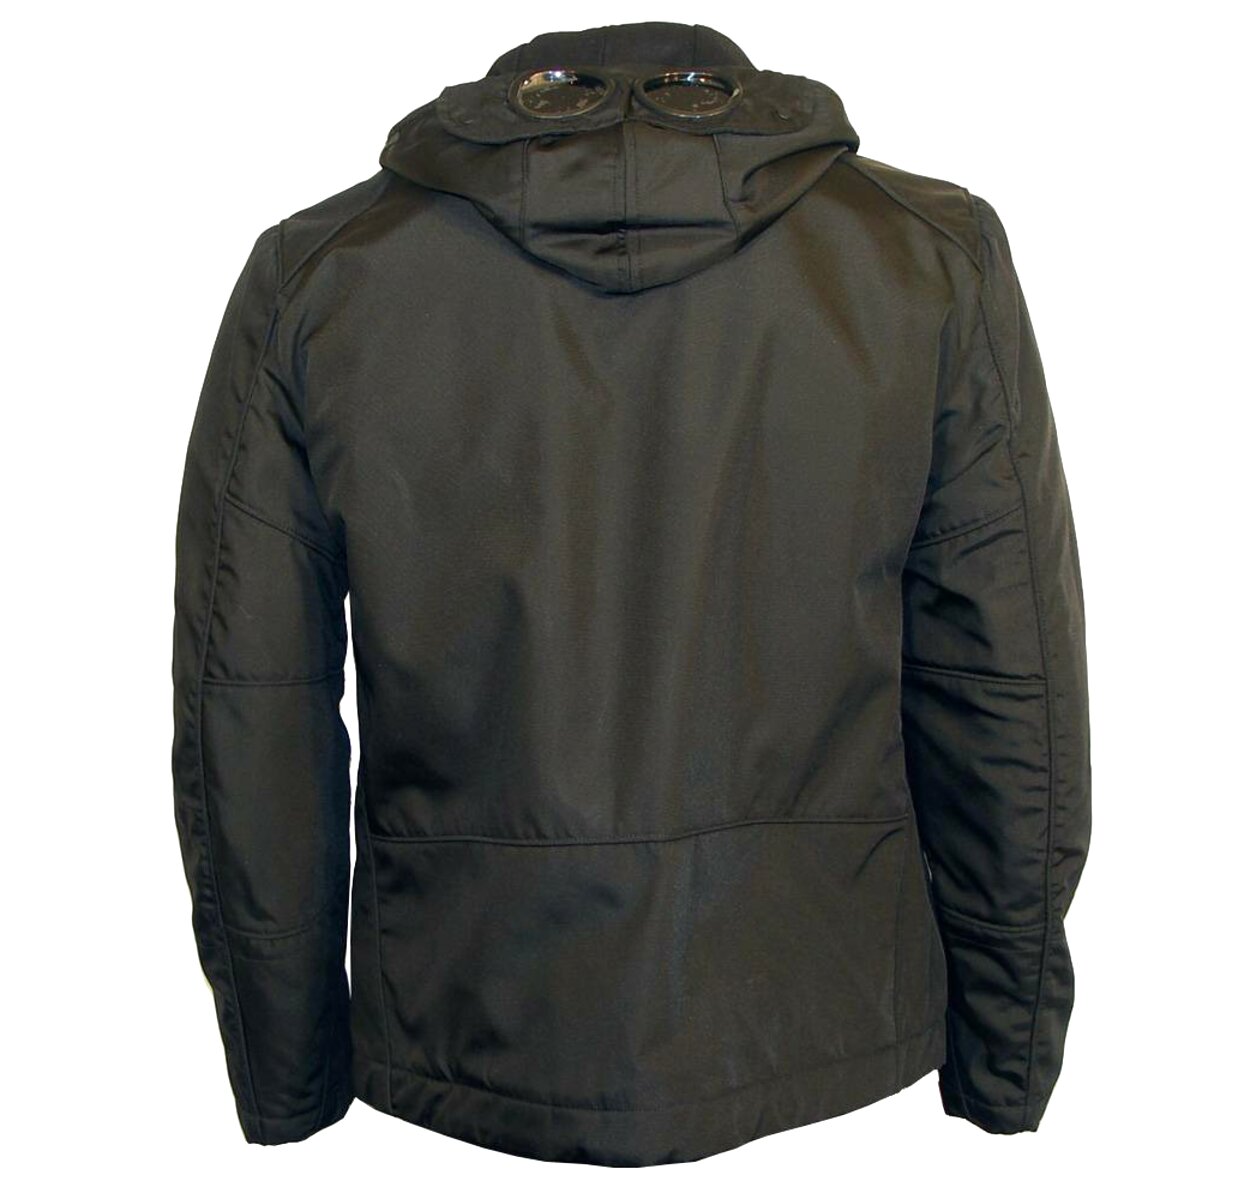 Cp Company Jacket Dynafil for sale in UK | 18 used Cp Company Jacket ...